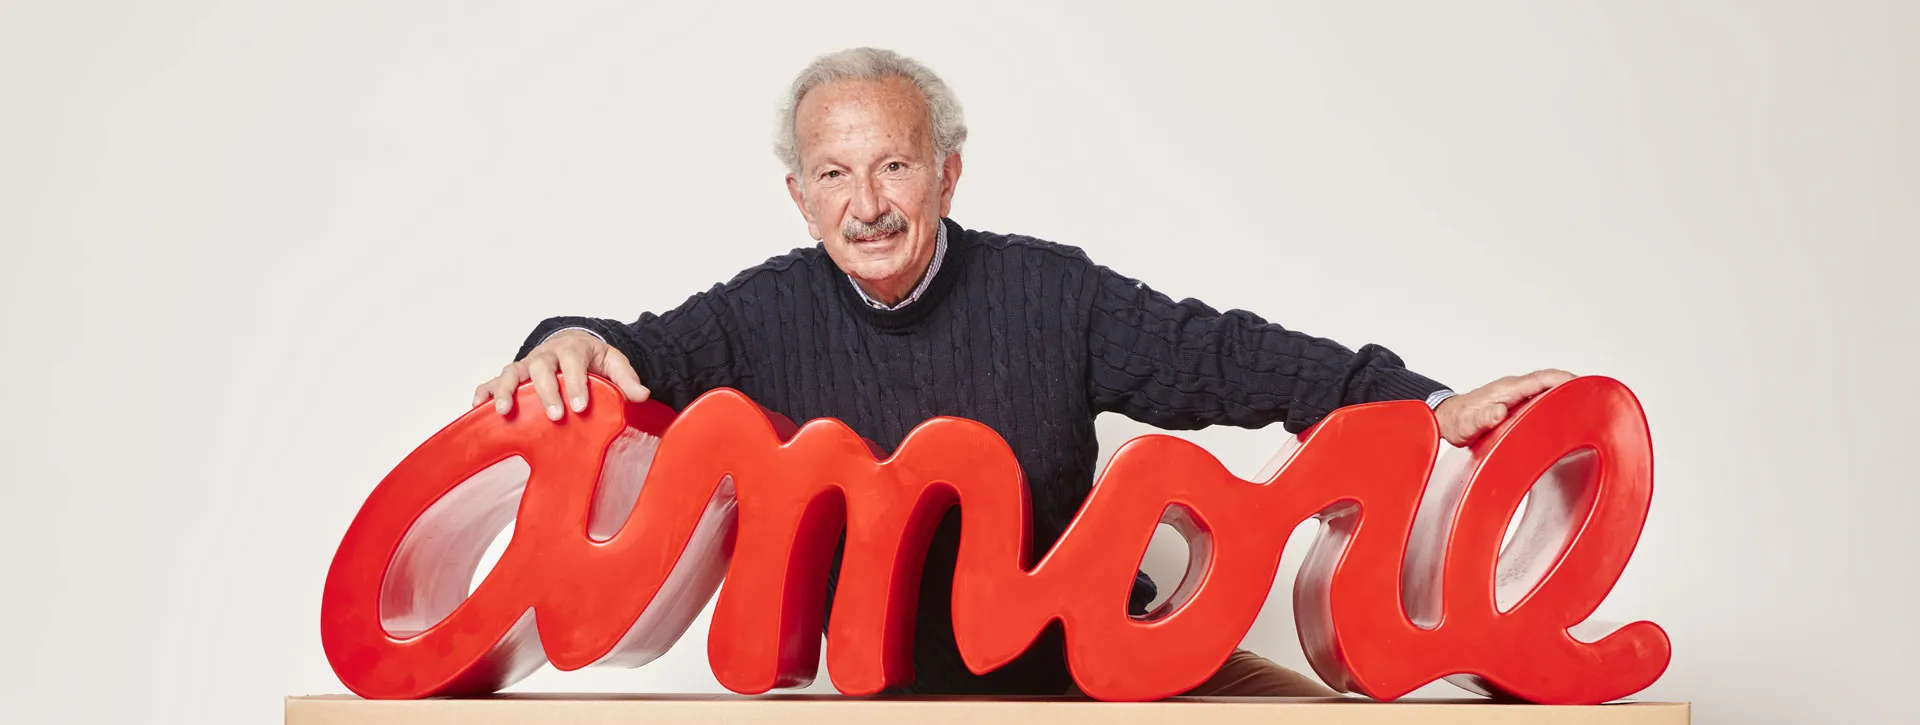 Amore bench by Giò Colonna Romano